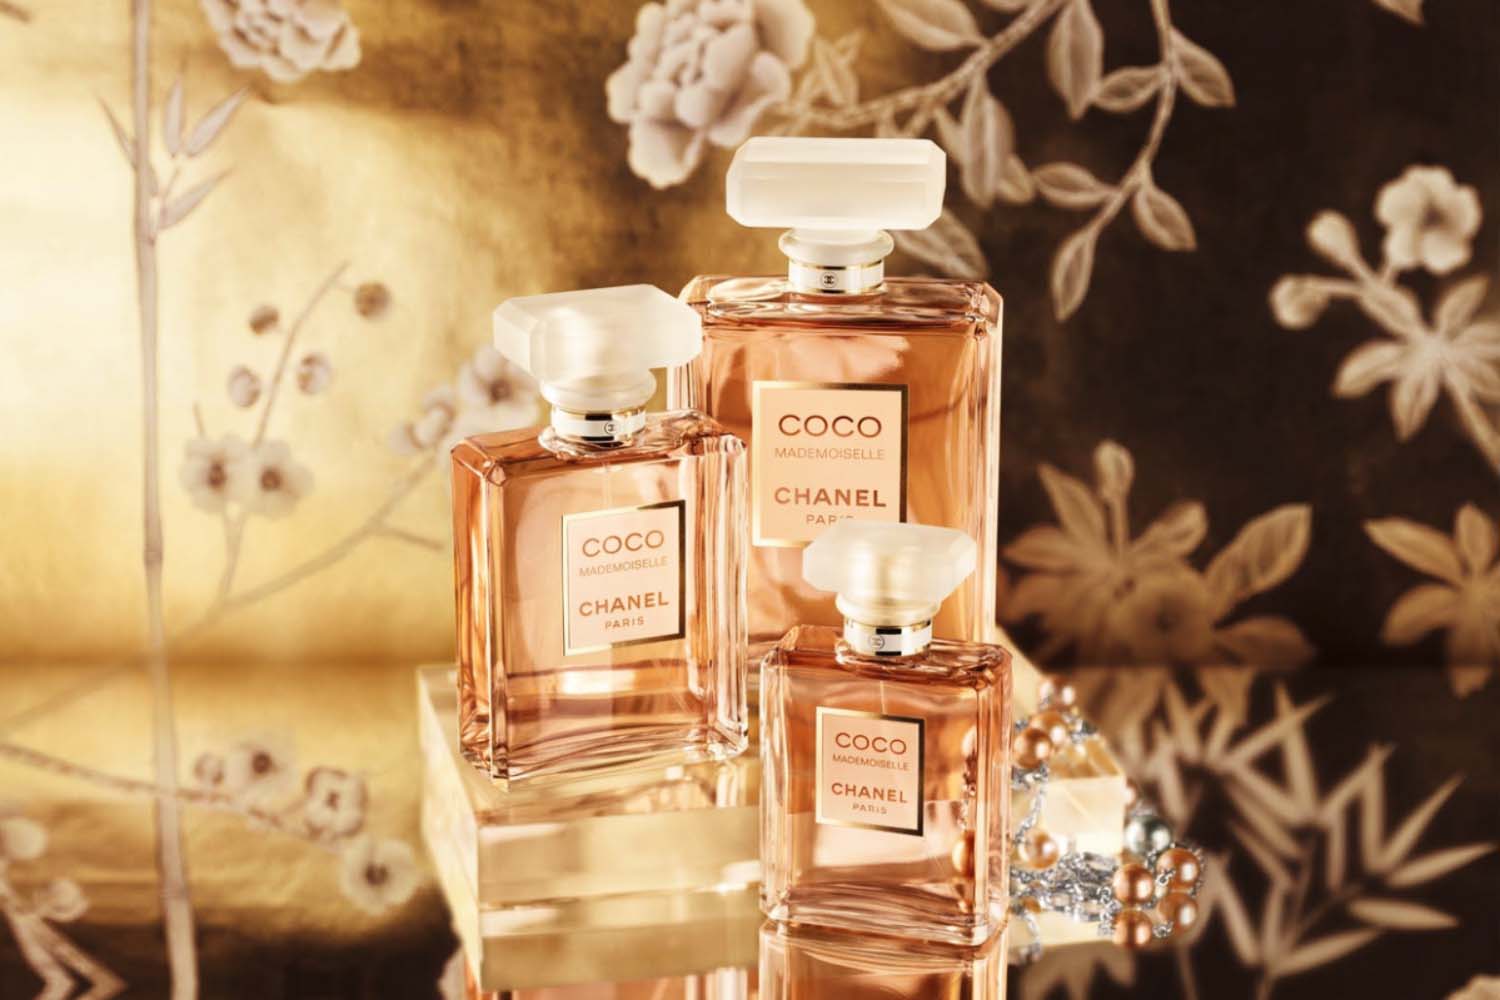 Chanel Coco Mademoiselle Review: The Scent of Sophistication